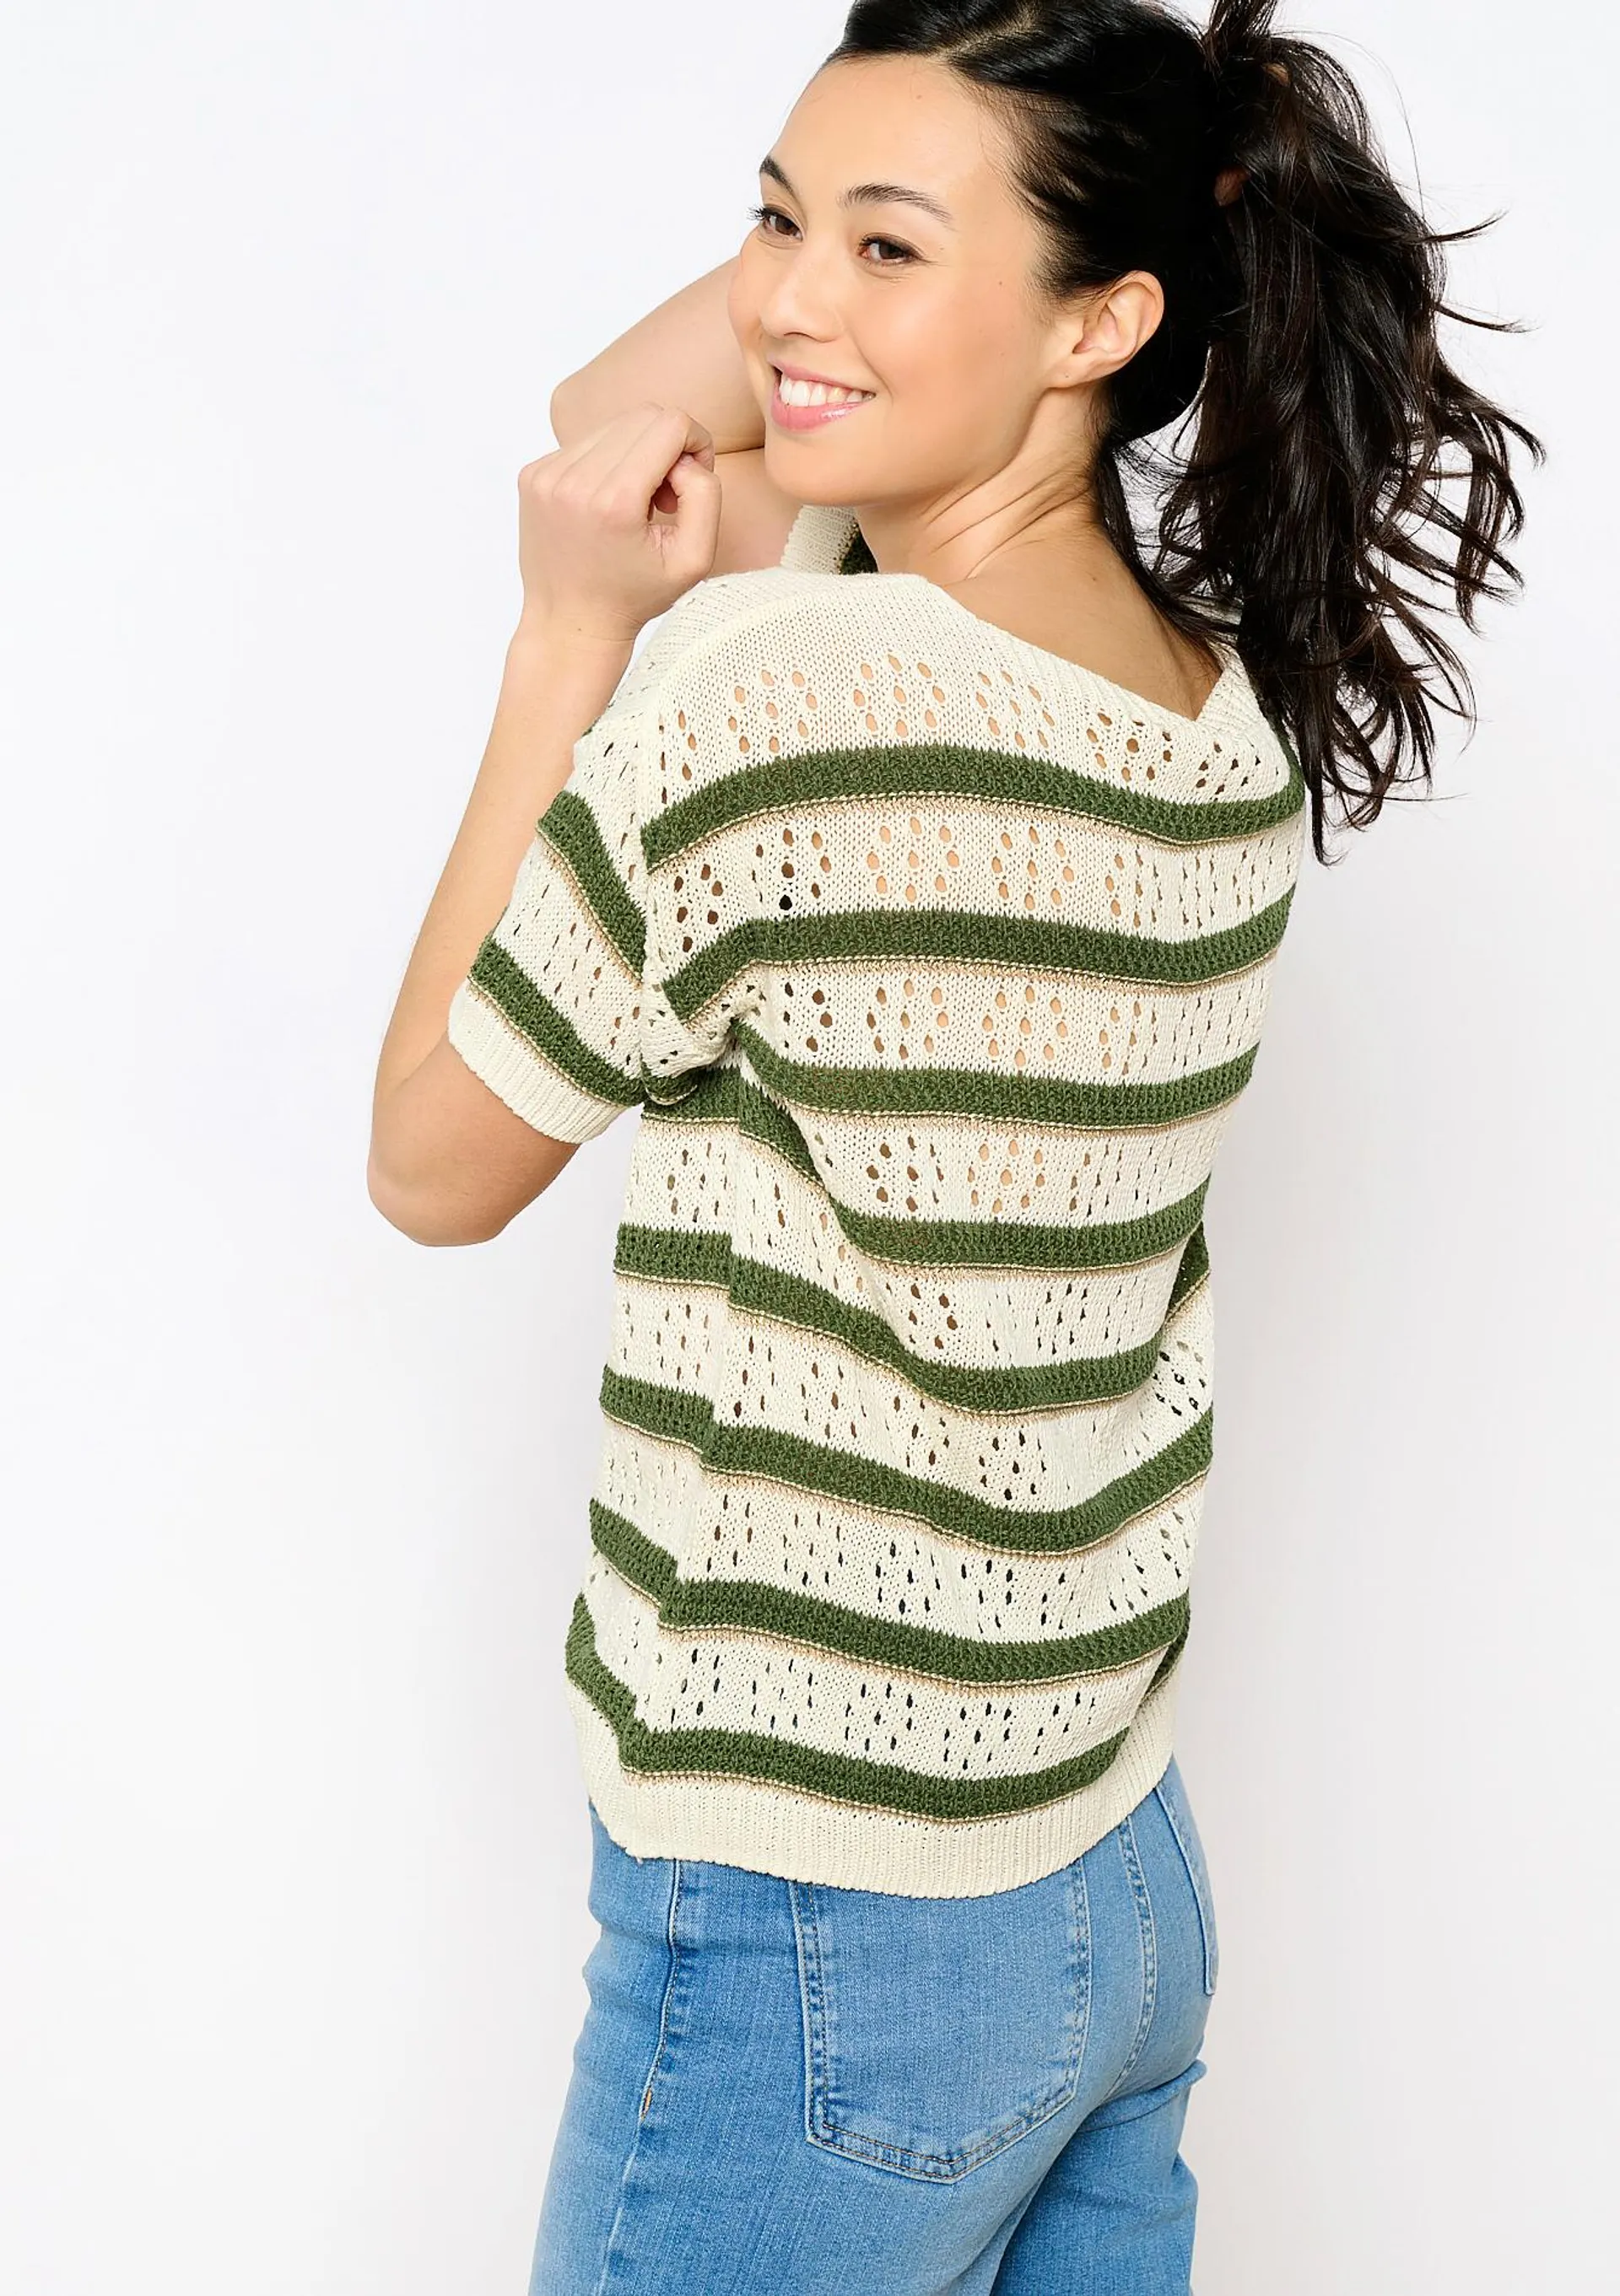 Crocheted pullover with stripes